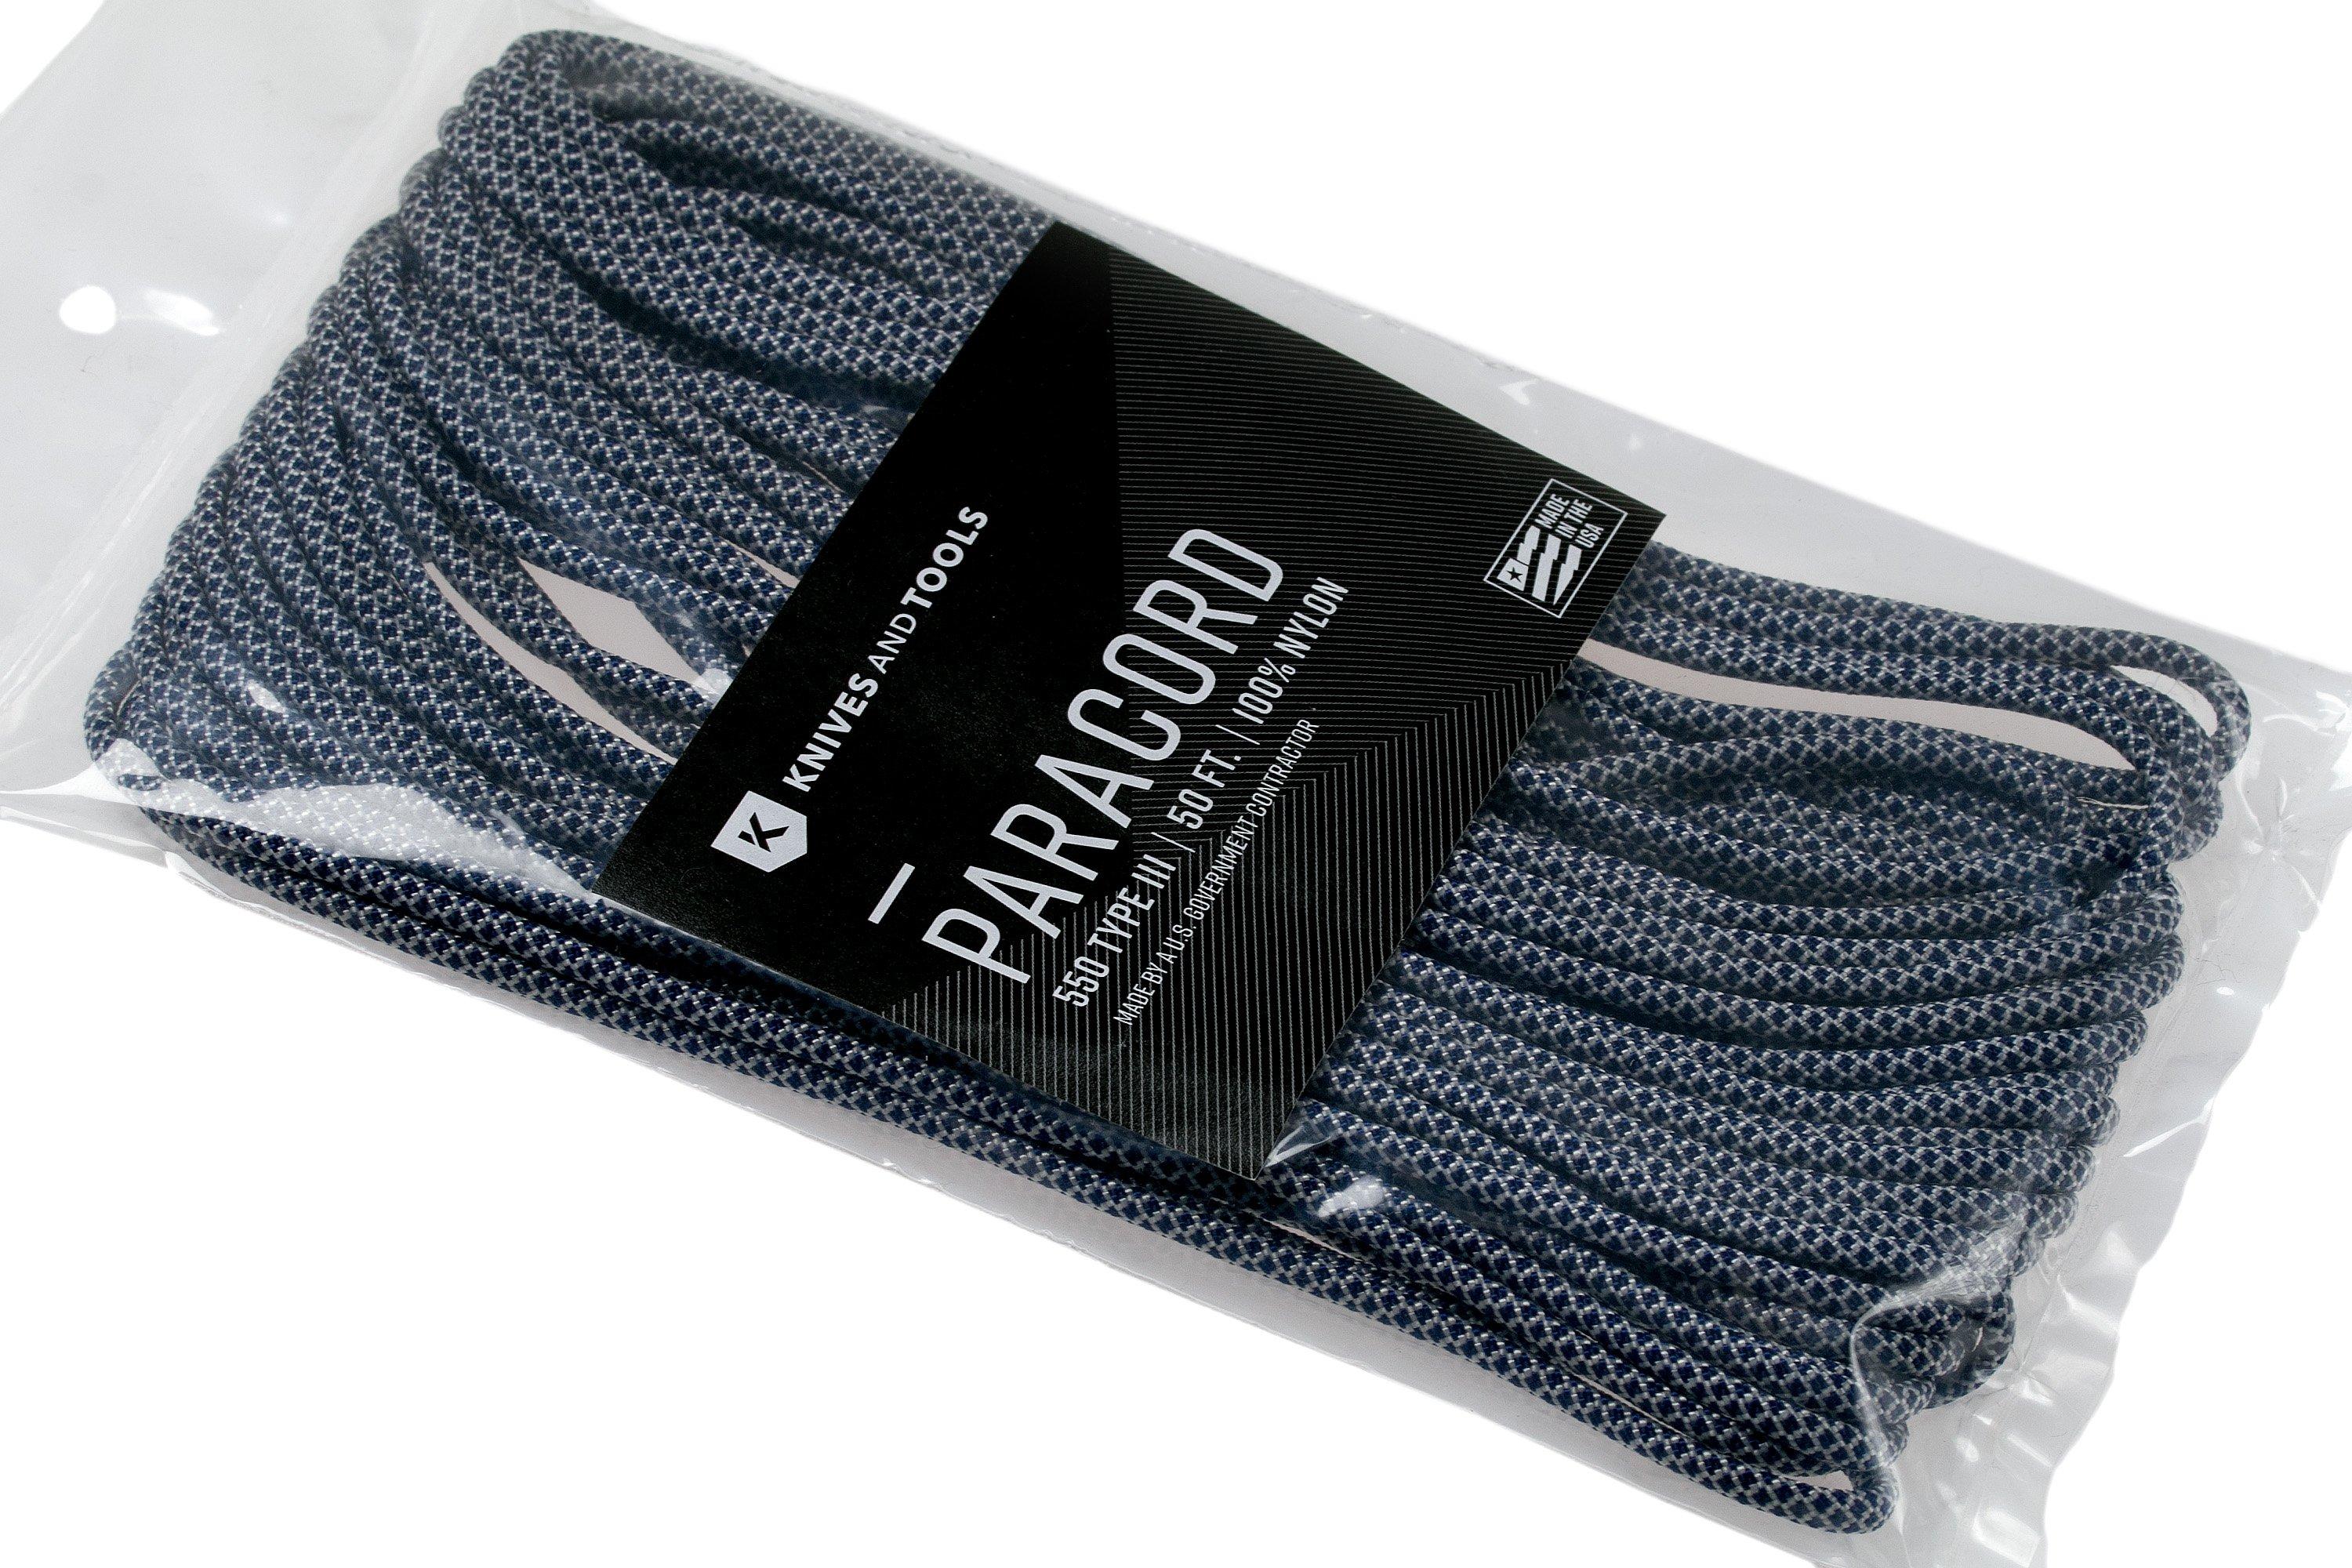 Knivesandtools 550 paracord type III, colour: cream with midnight